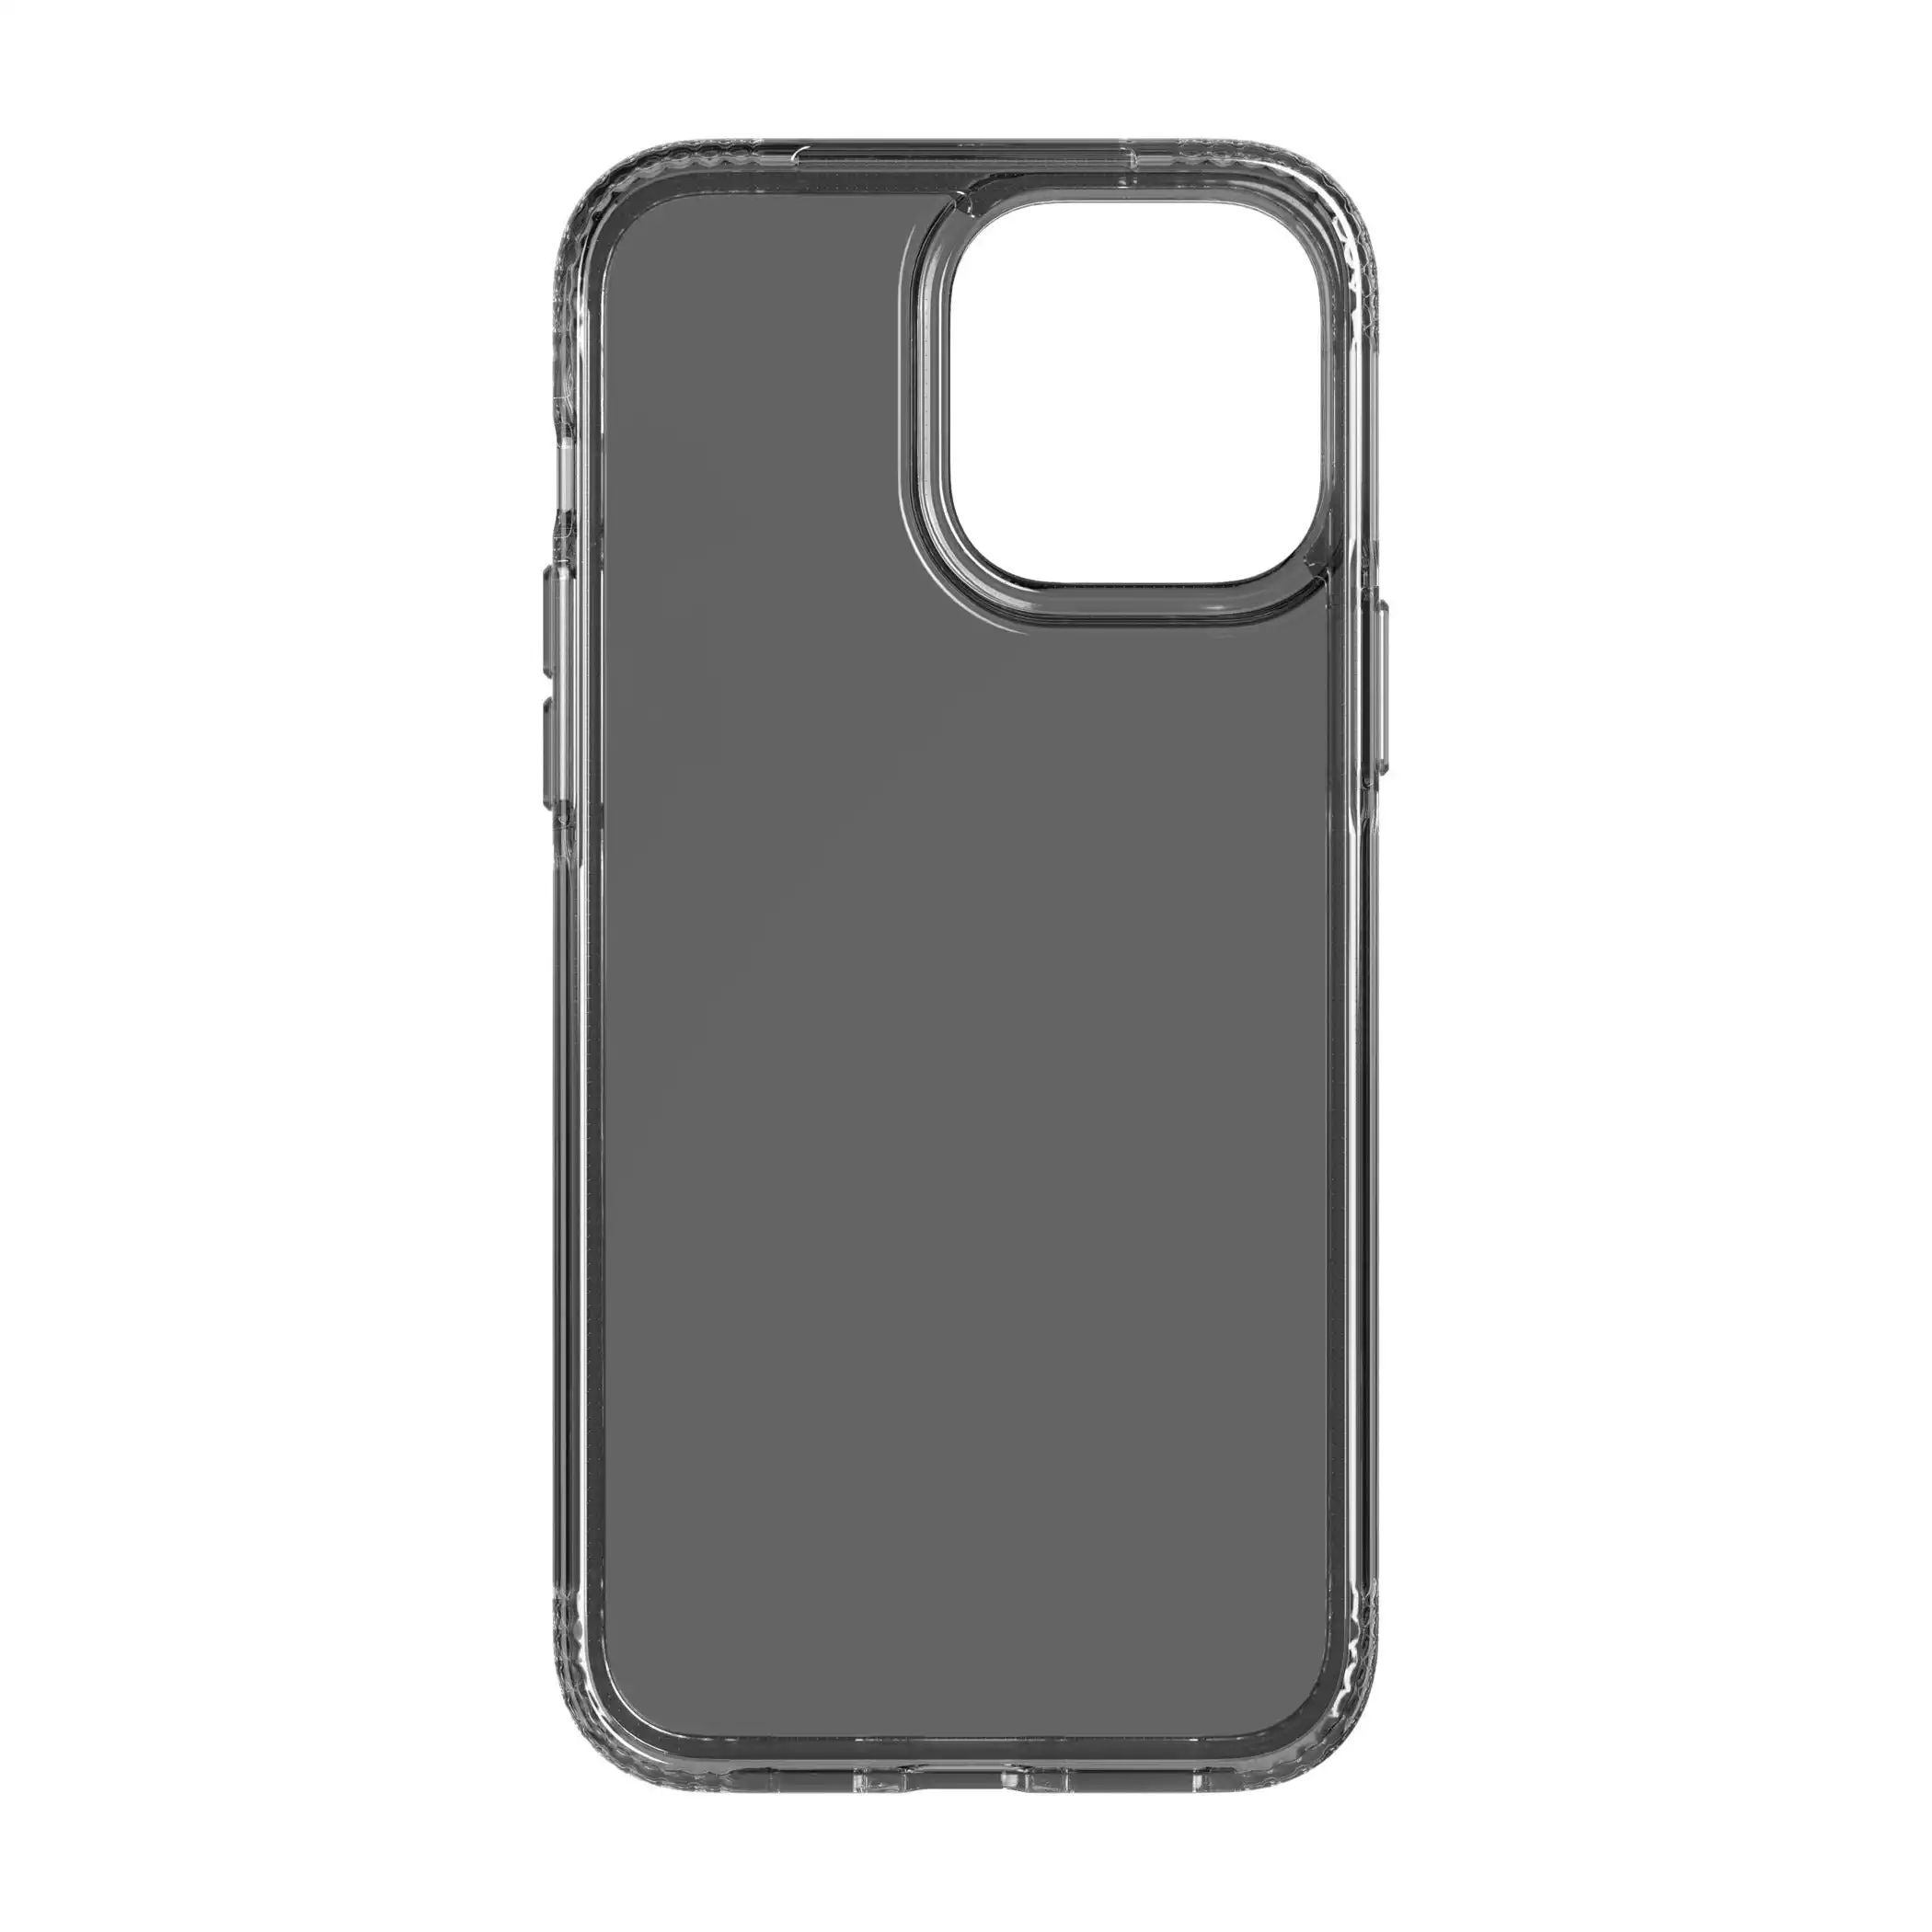 Tech21 EvoTint Phone Case for iPhone 13 Pro Max - Ash